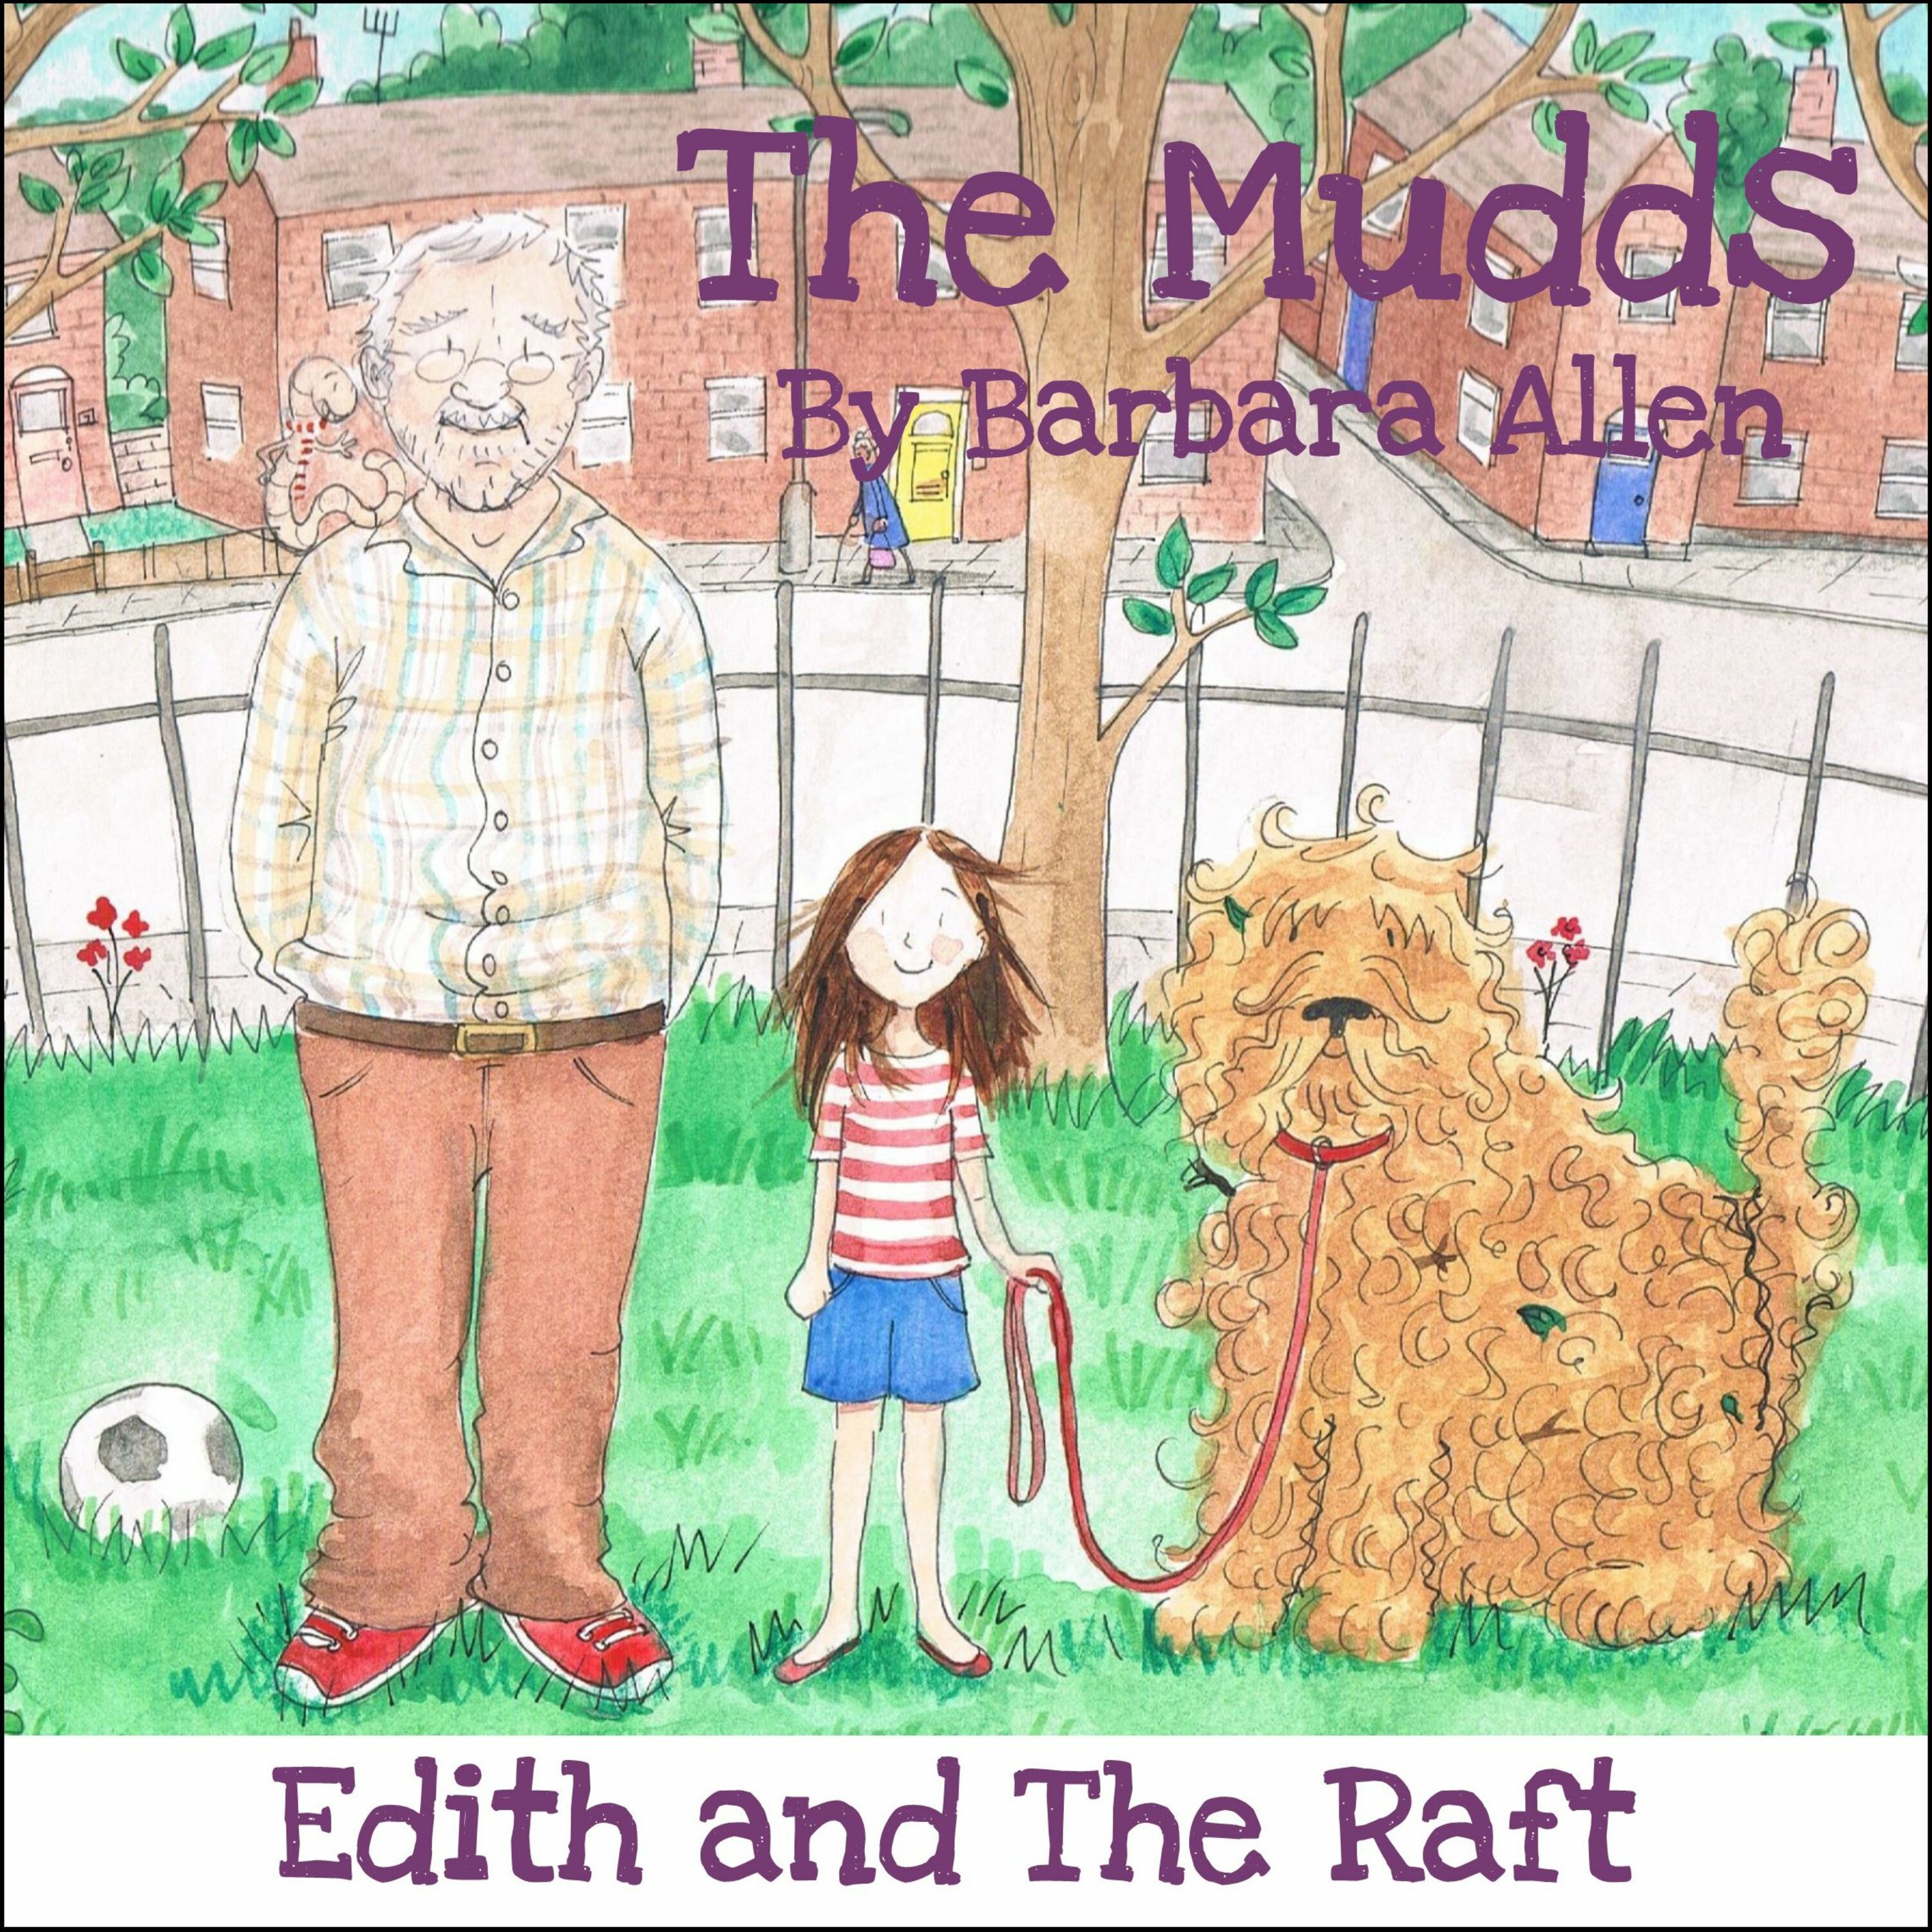 Edith and the Raft